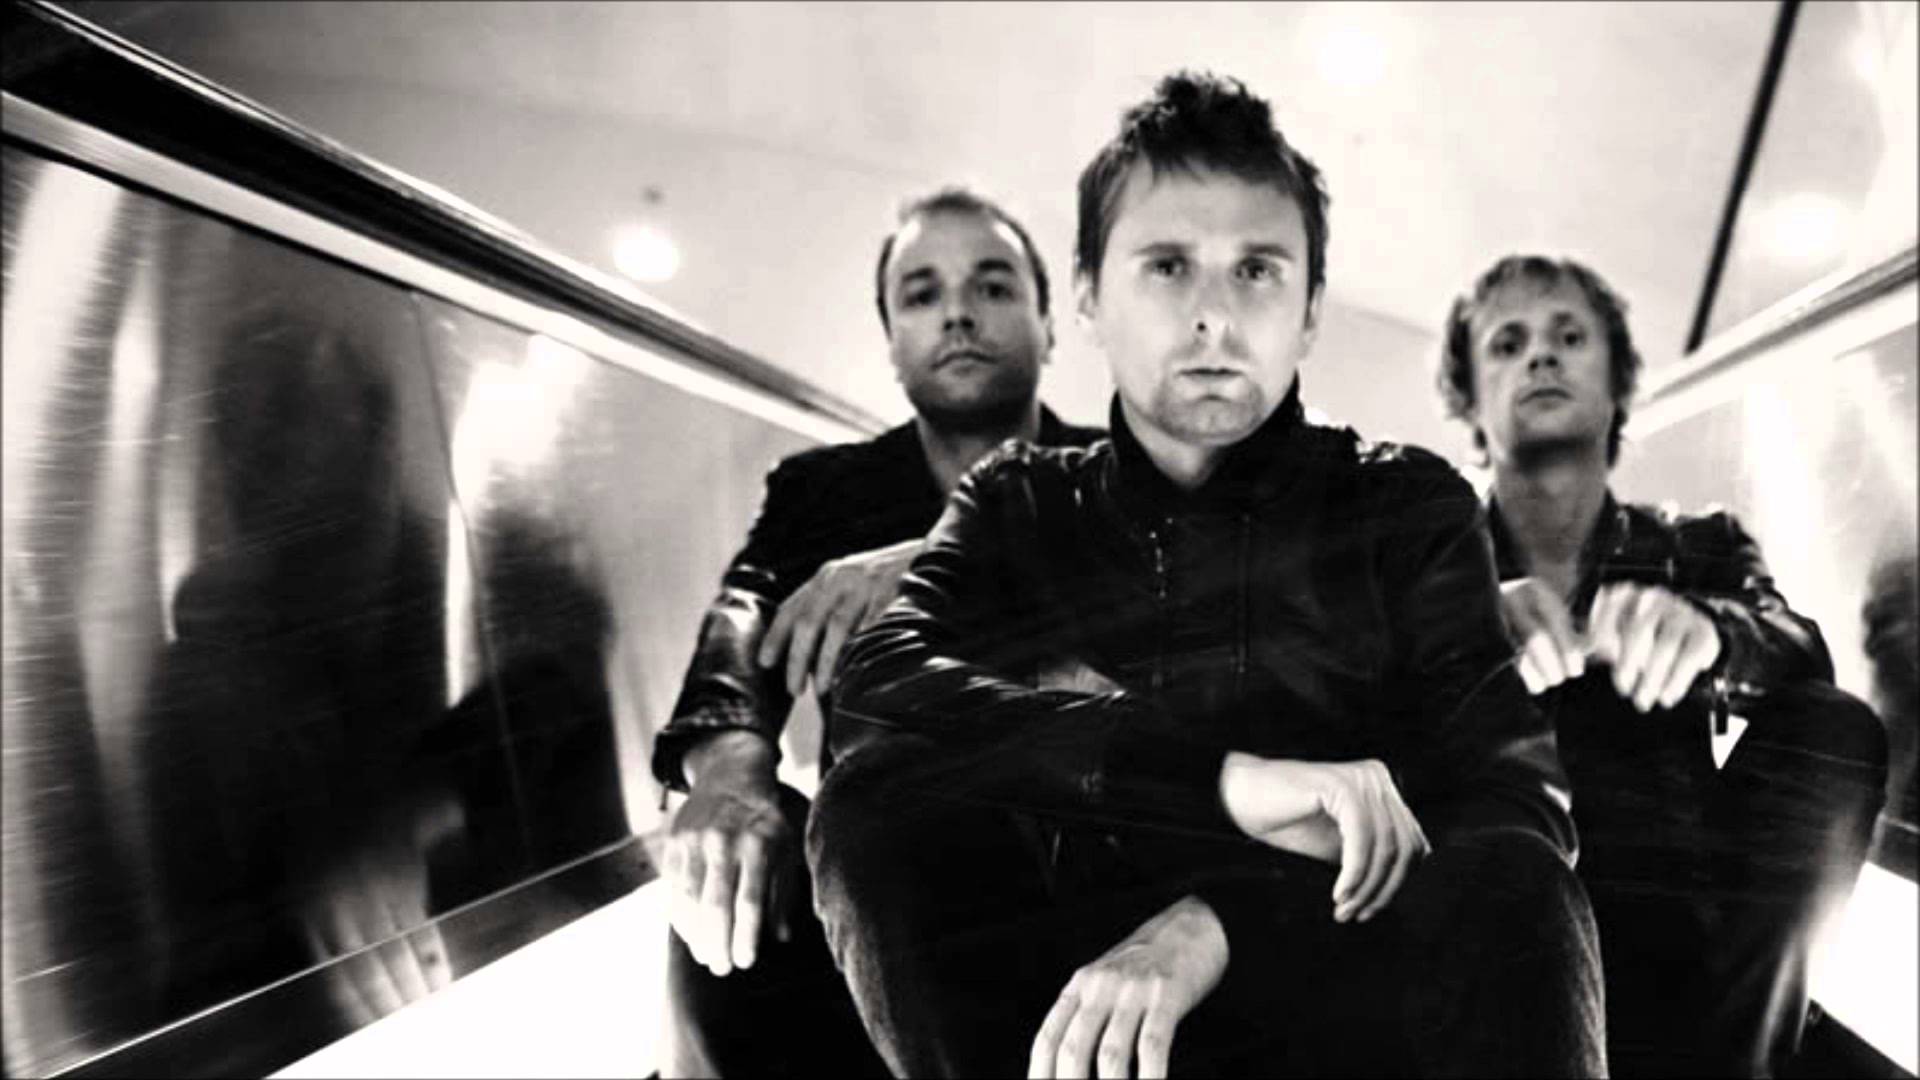 Gallery For > Muse Band Wallpaper